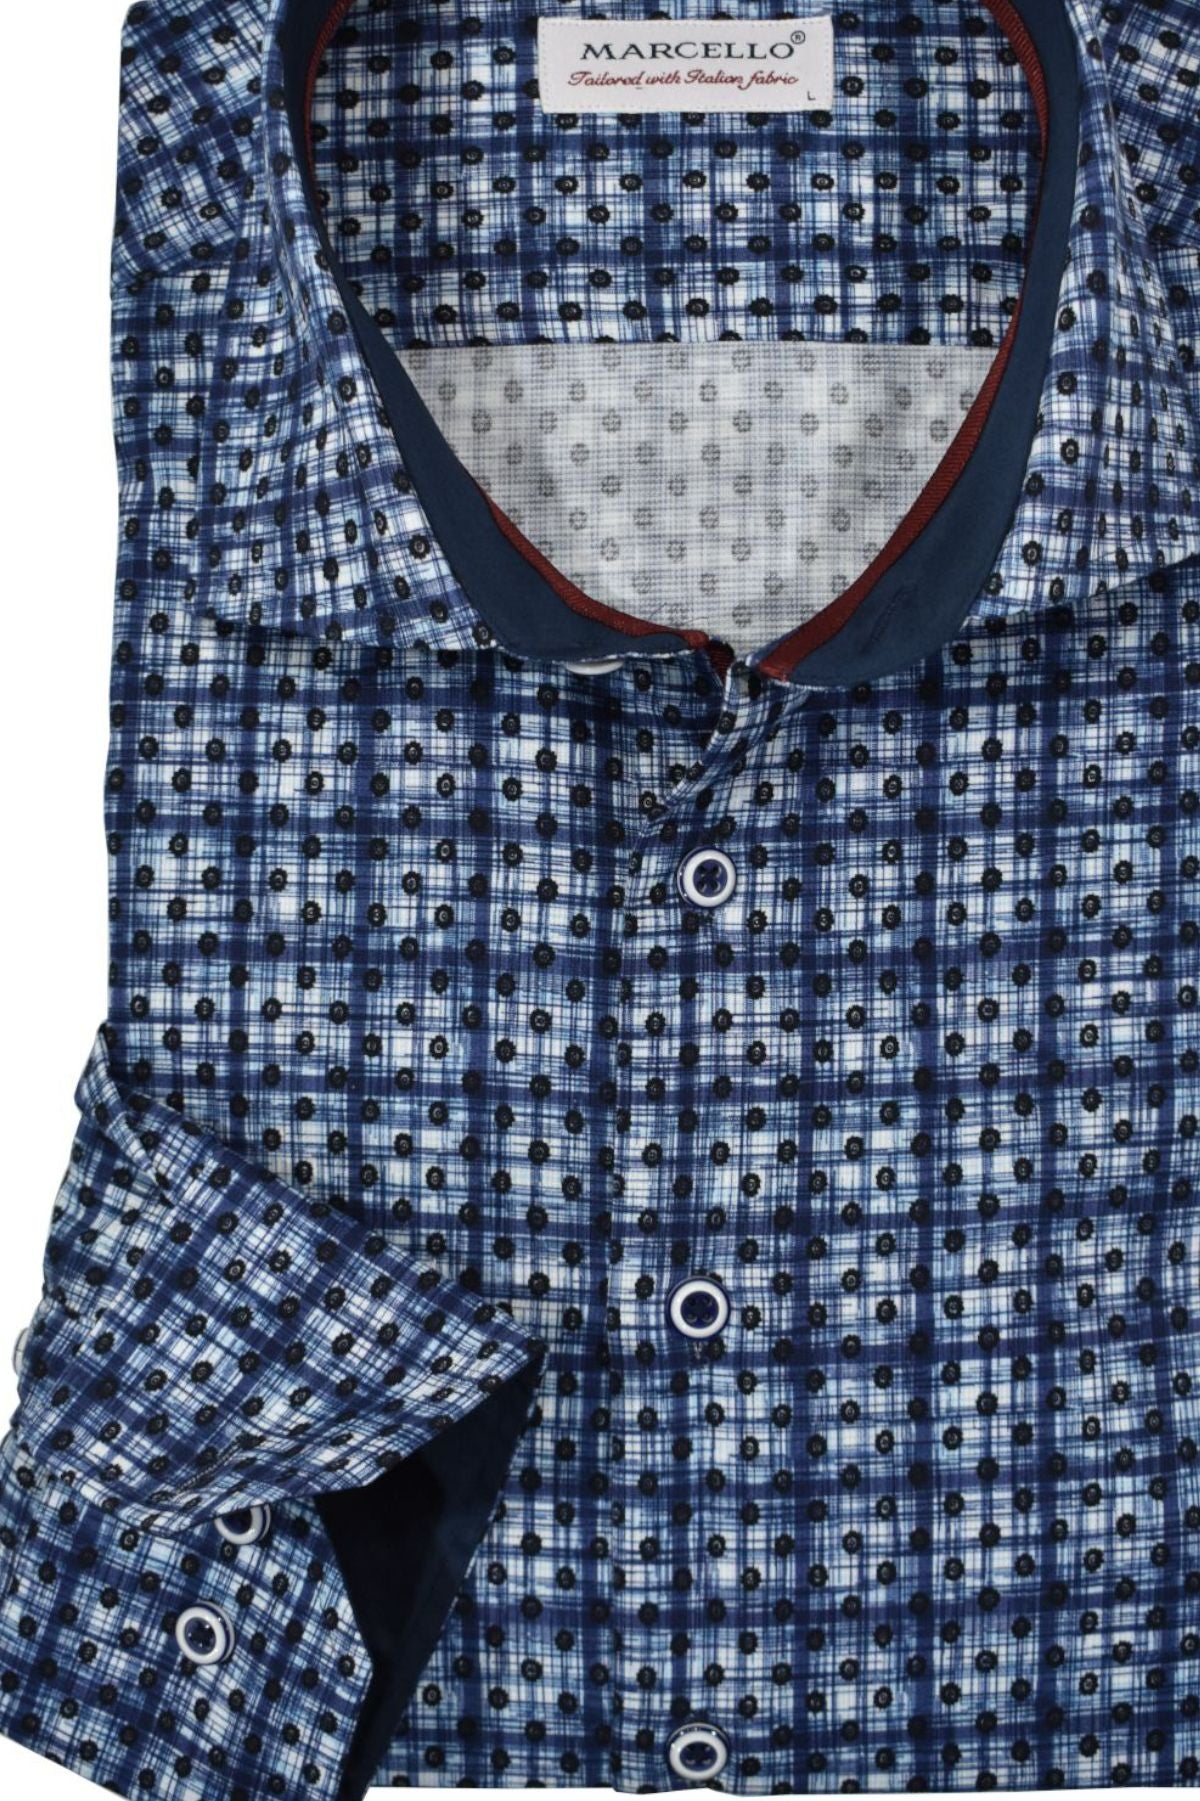 Looking for a cool shirt to pair with any color denims? This is an excellent choice. The white ground with a brushed window pane pattern has random matched dots allover. The cool pattern looks great worn out with the sleeves rolled up.  The fabric is soft to the touch, consisting of luxe cotton and a sateen finish.